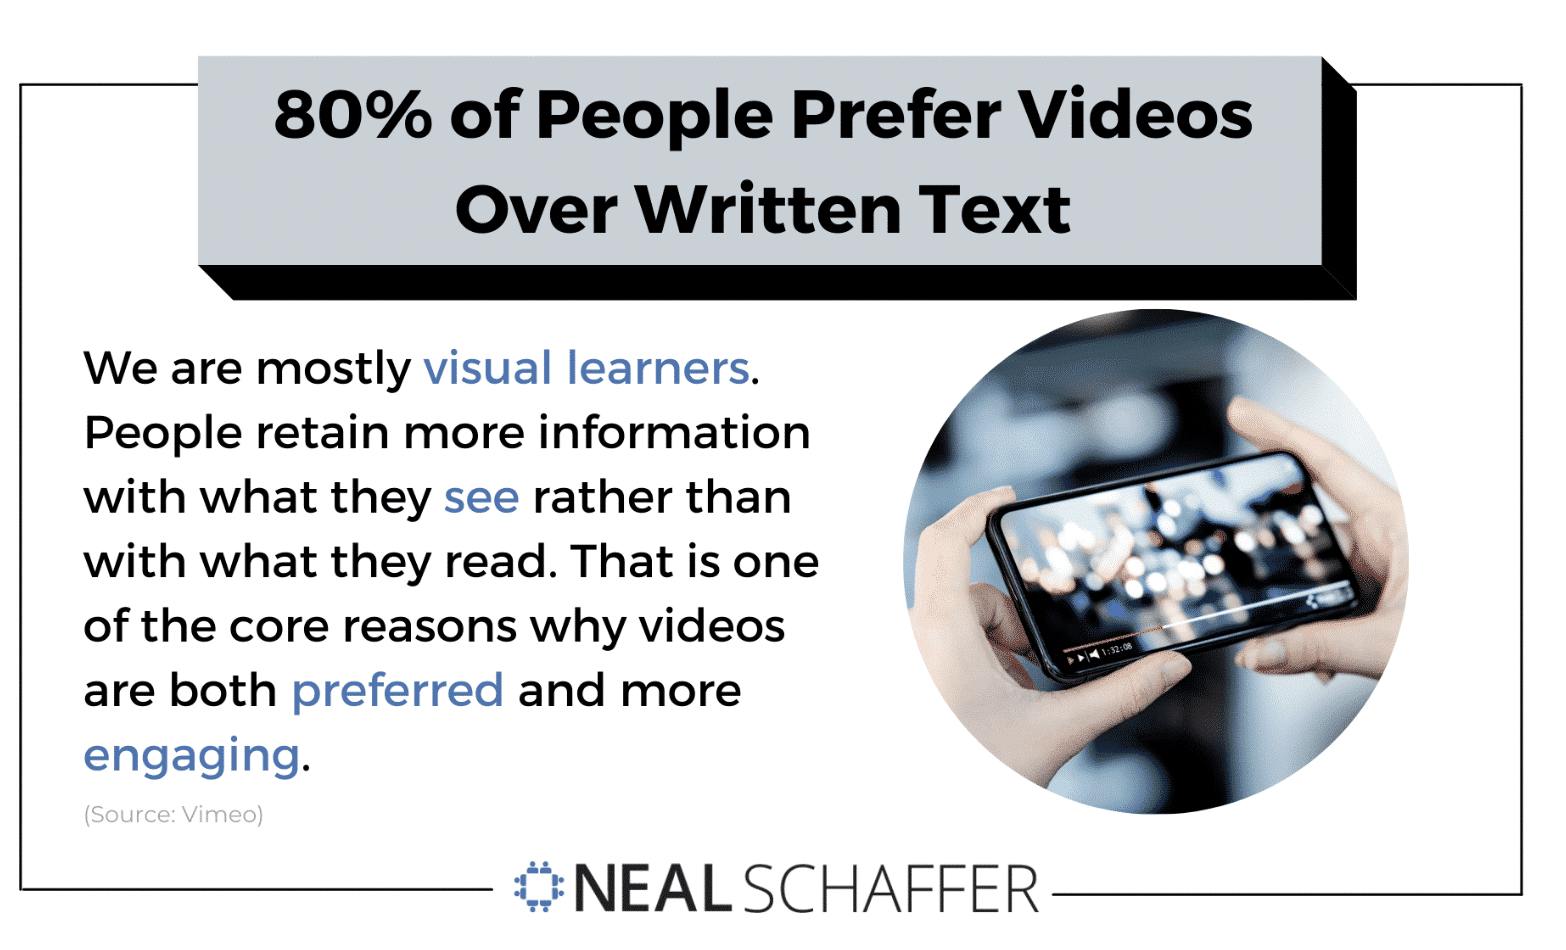 infographic shows that 80% of people prefer videos over written text